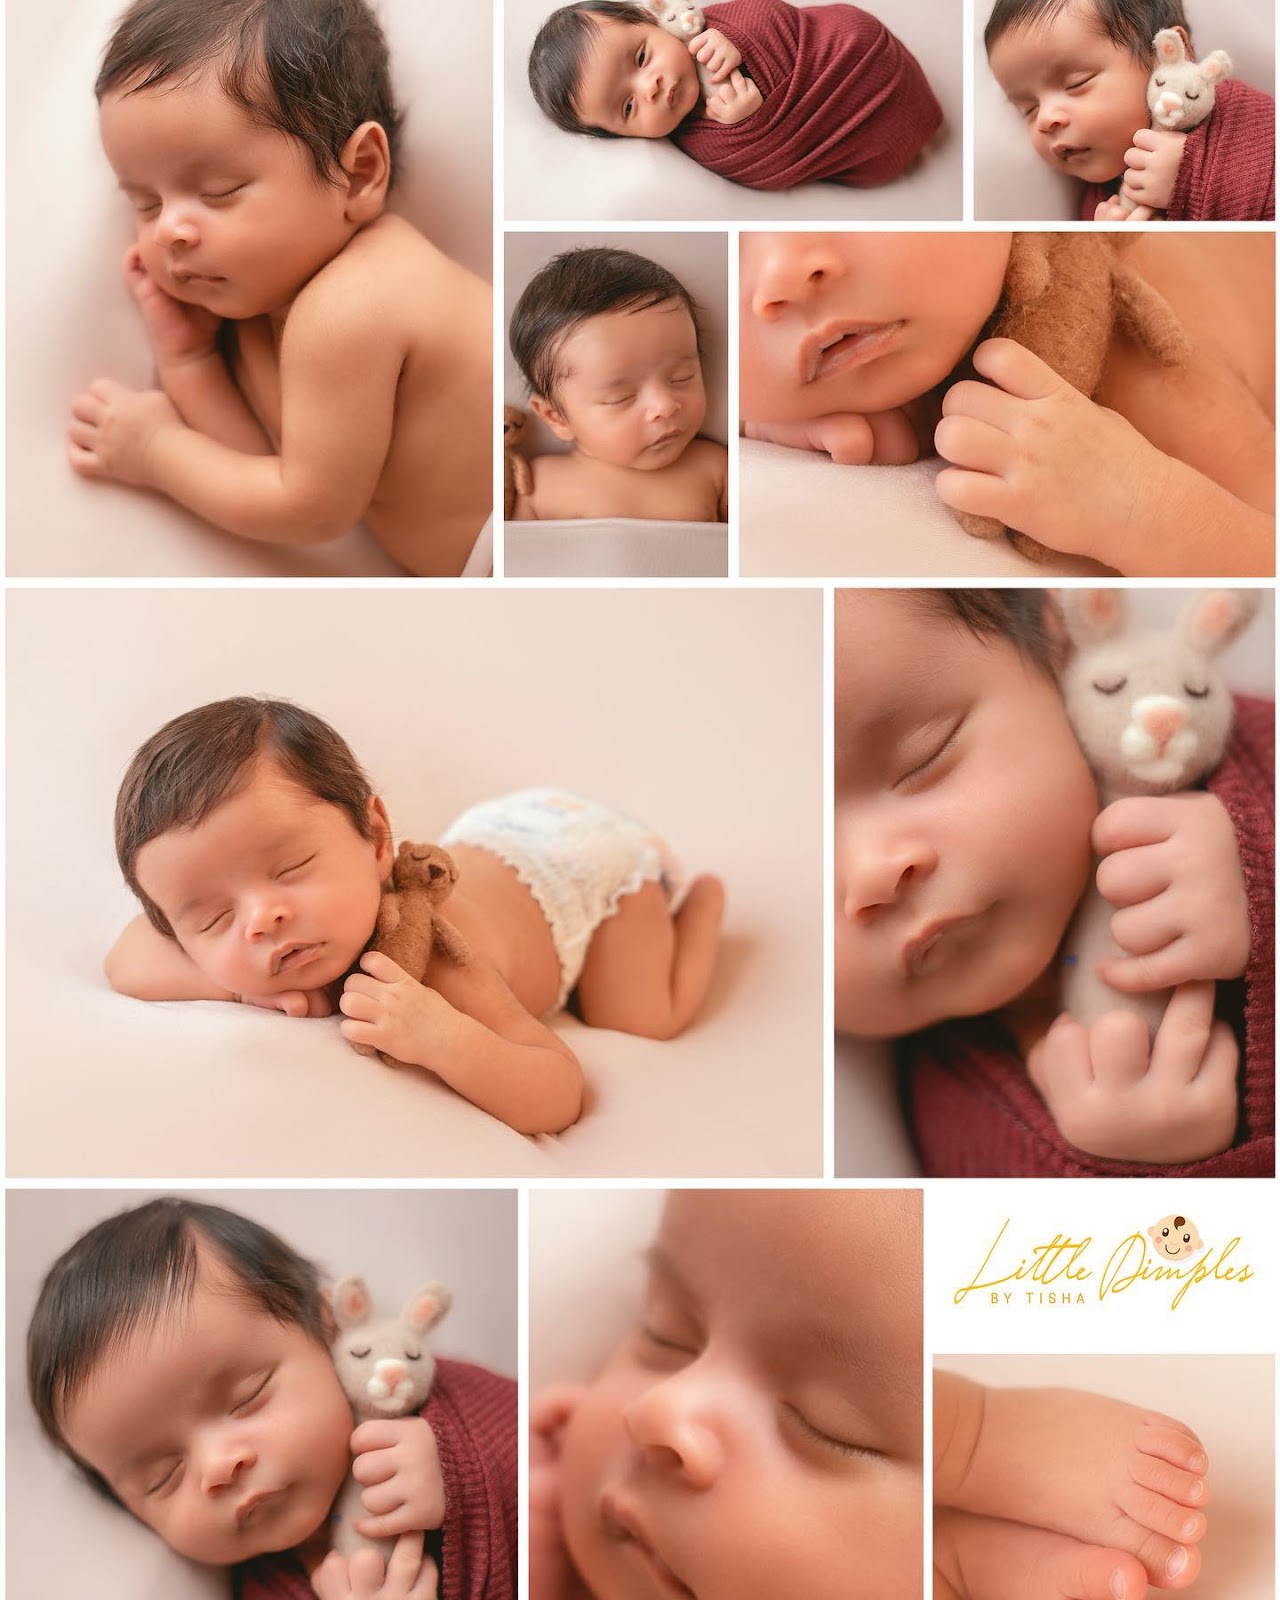 We specialize in elegant newborn photography and baby photography. If you are looking for Baby photographers Bangalore or newborn photoshoot in Bangalore, contact us now!